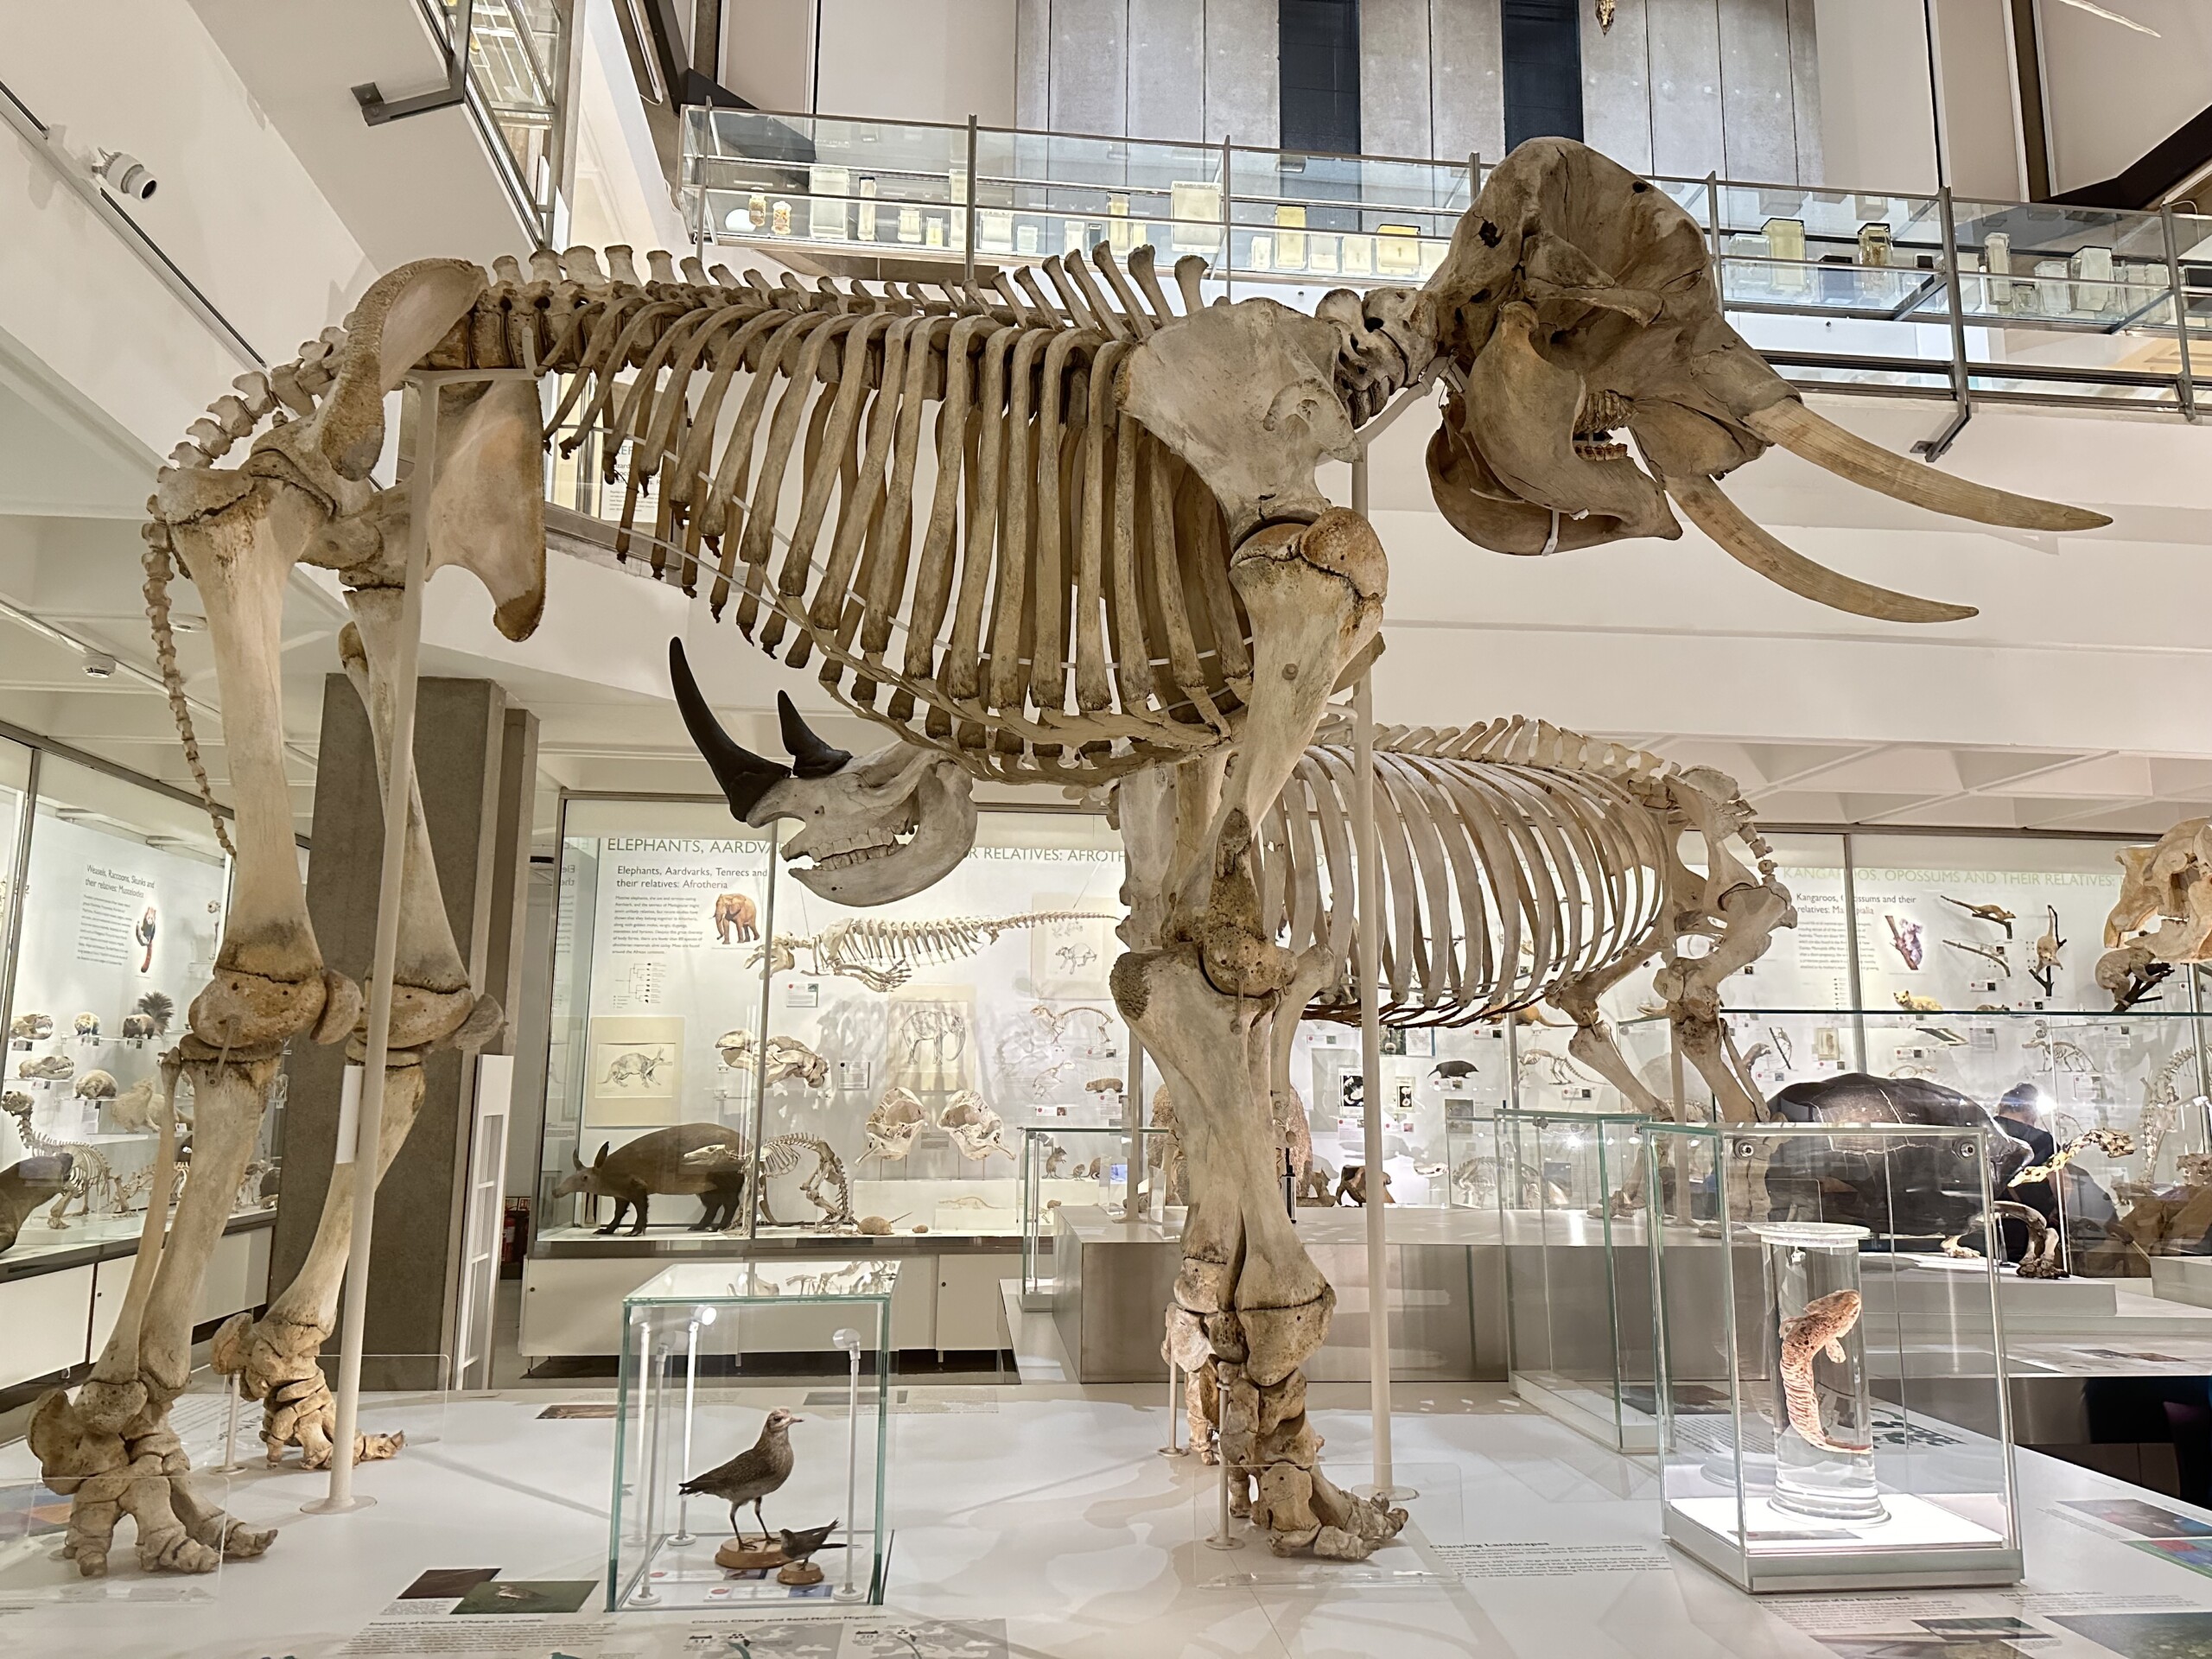 Skeleton of an elephant with tusks in a museum. Other animal specimens and skeletons visible in the background, including a rhino directly behind the elephant. 